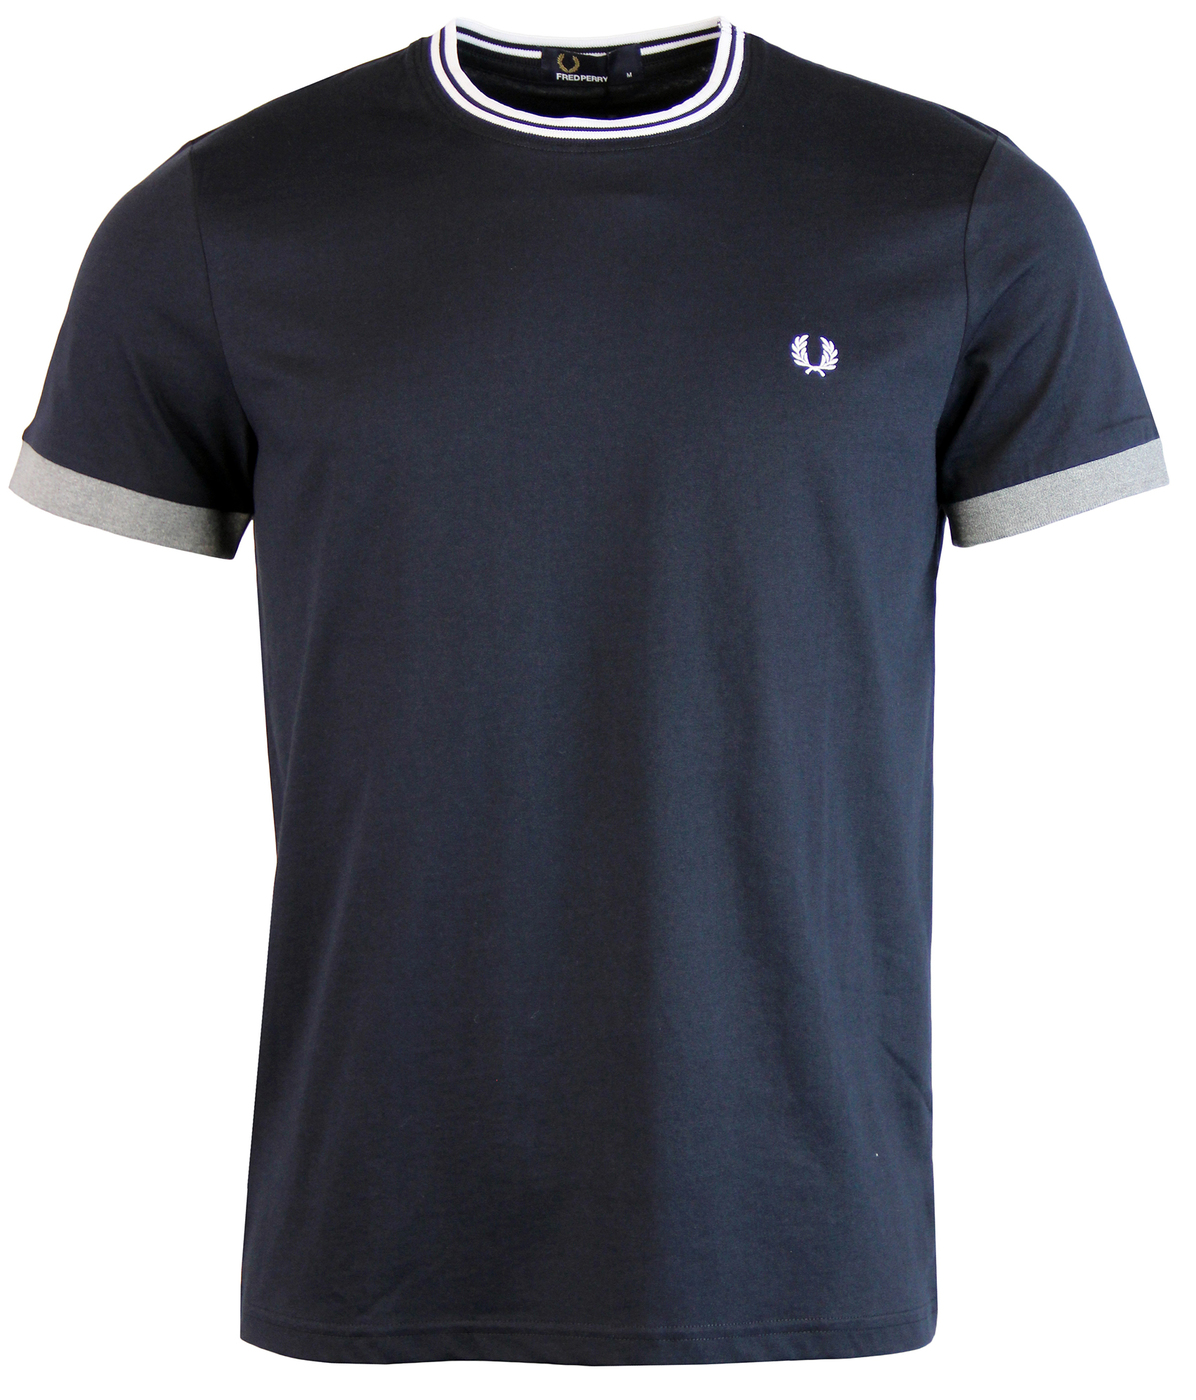 FRED PERRY Retro Twin Tipped Crew T-shirt in Navy